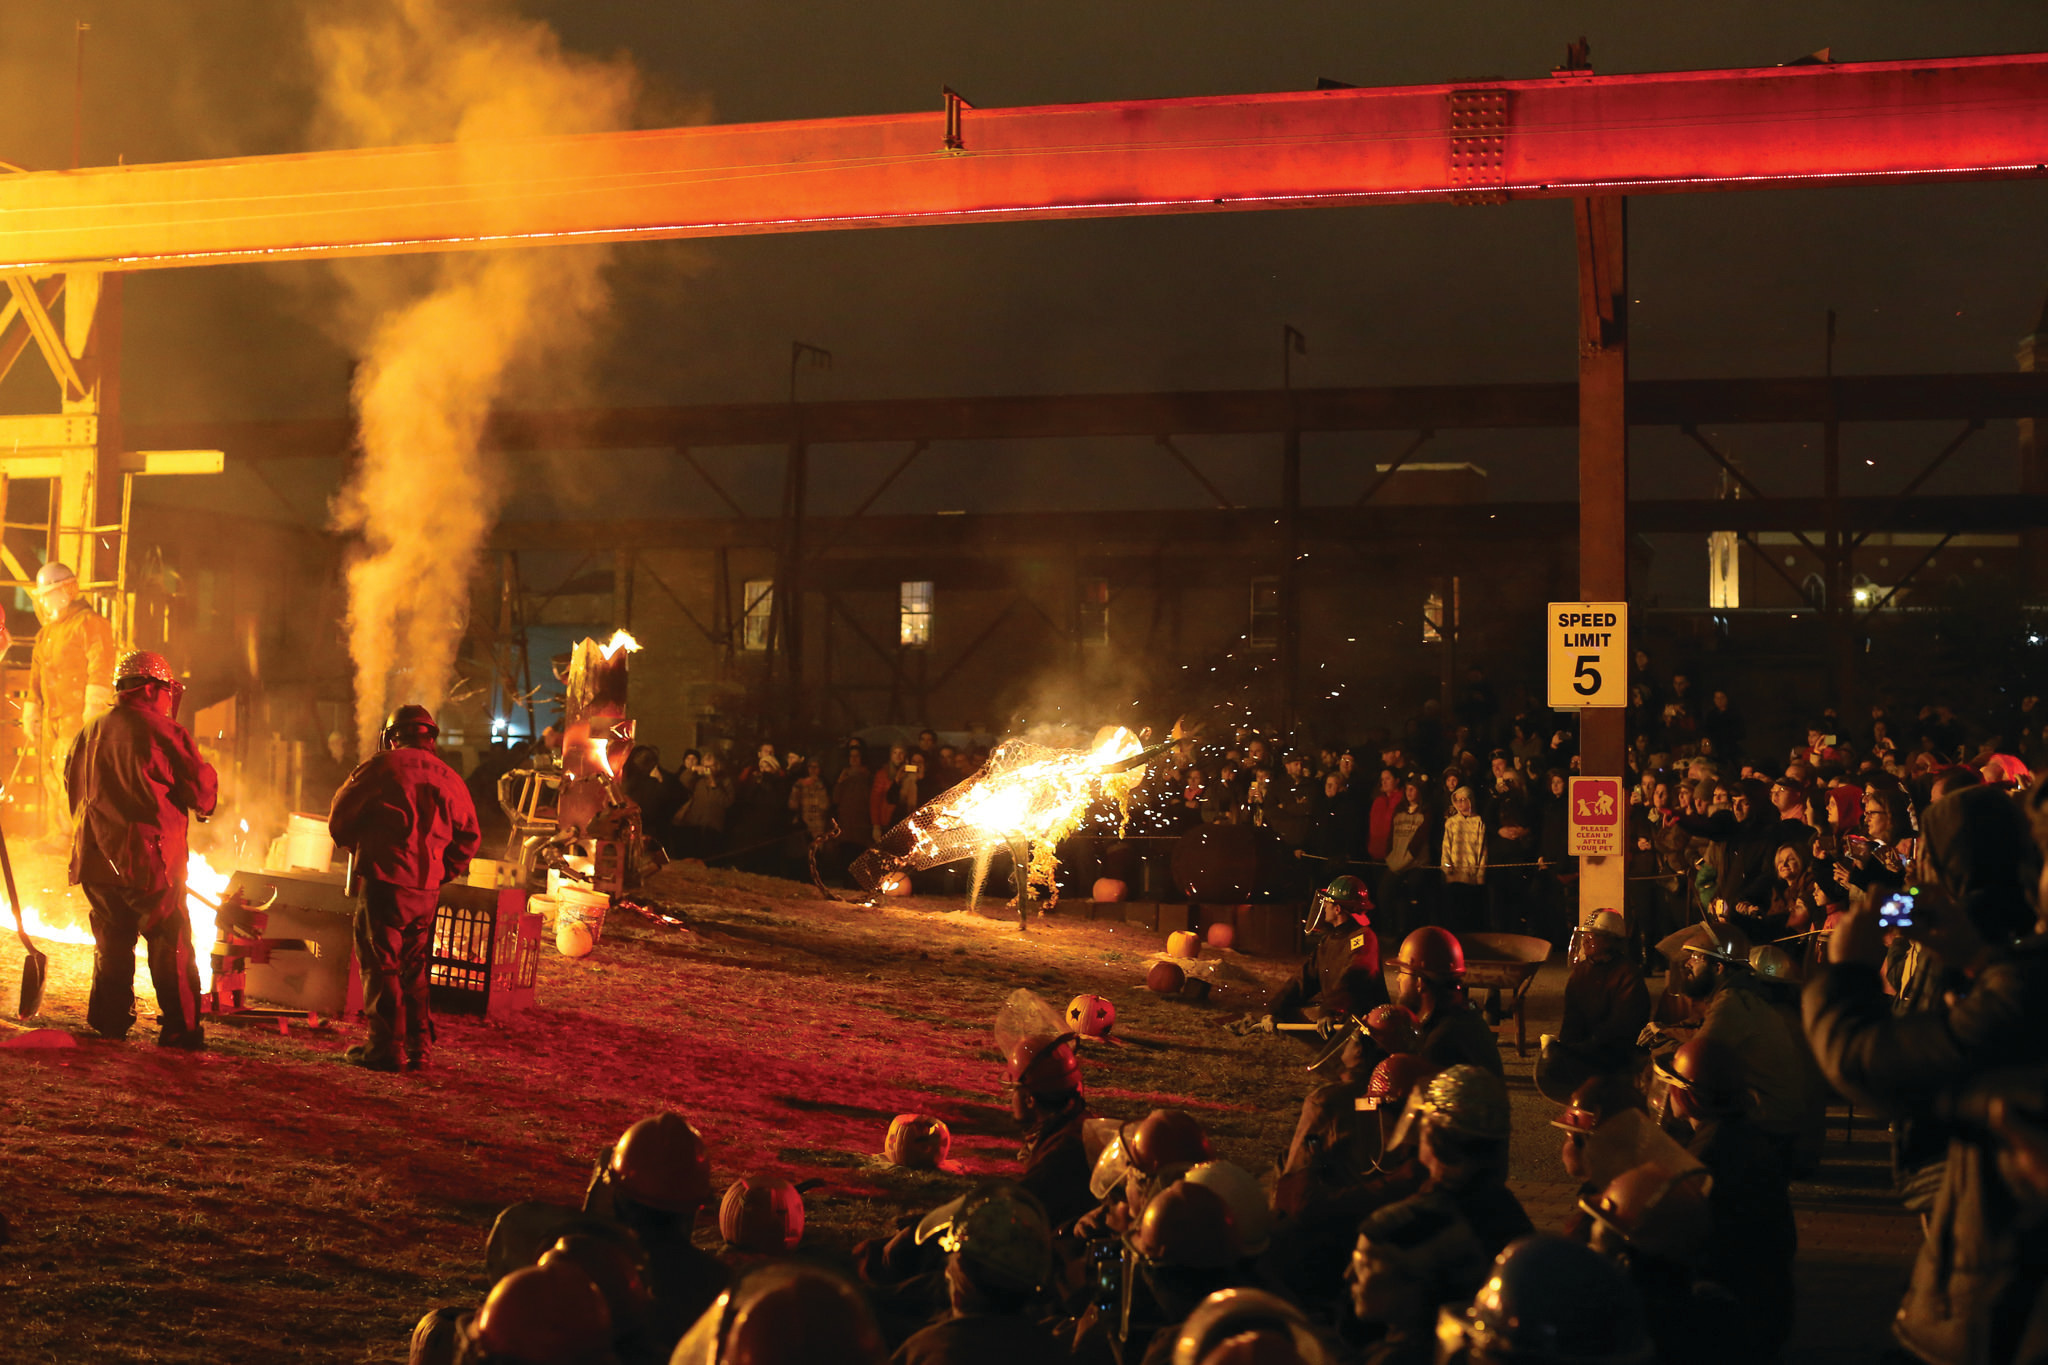 The Halloween Iron Pour at the Steel Yard